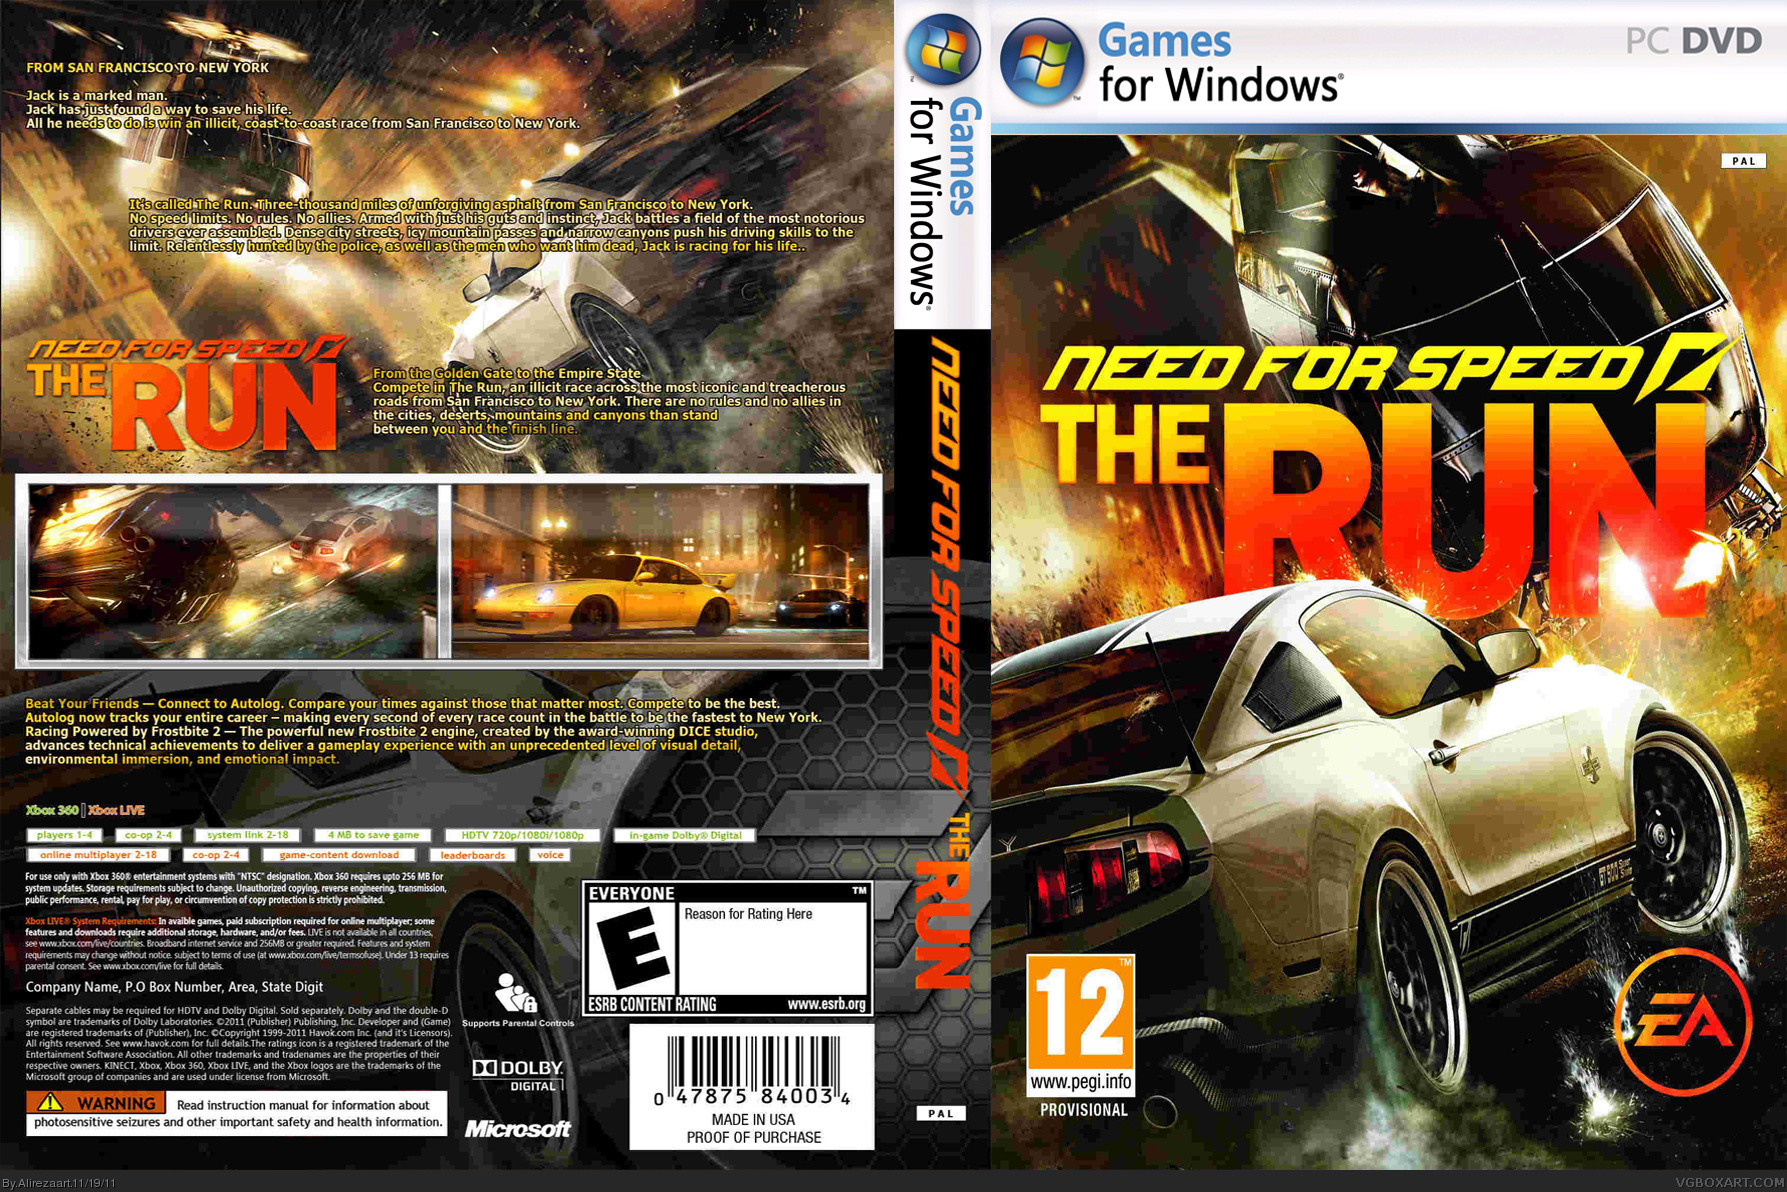 Need for speed The Run box cover